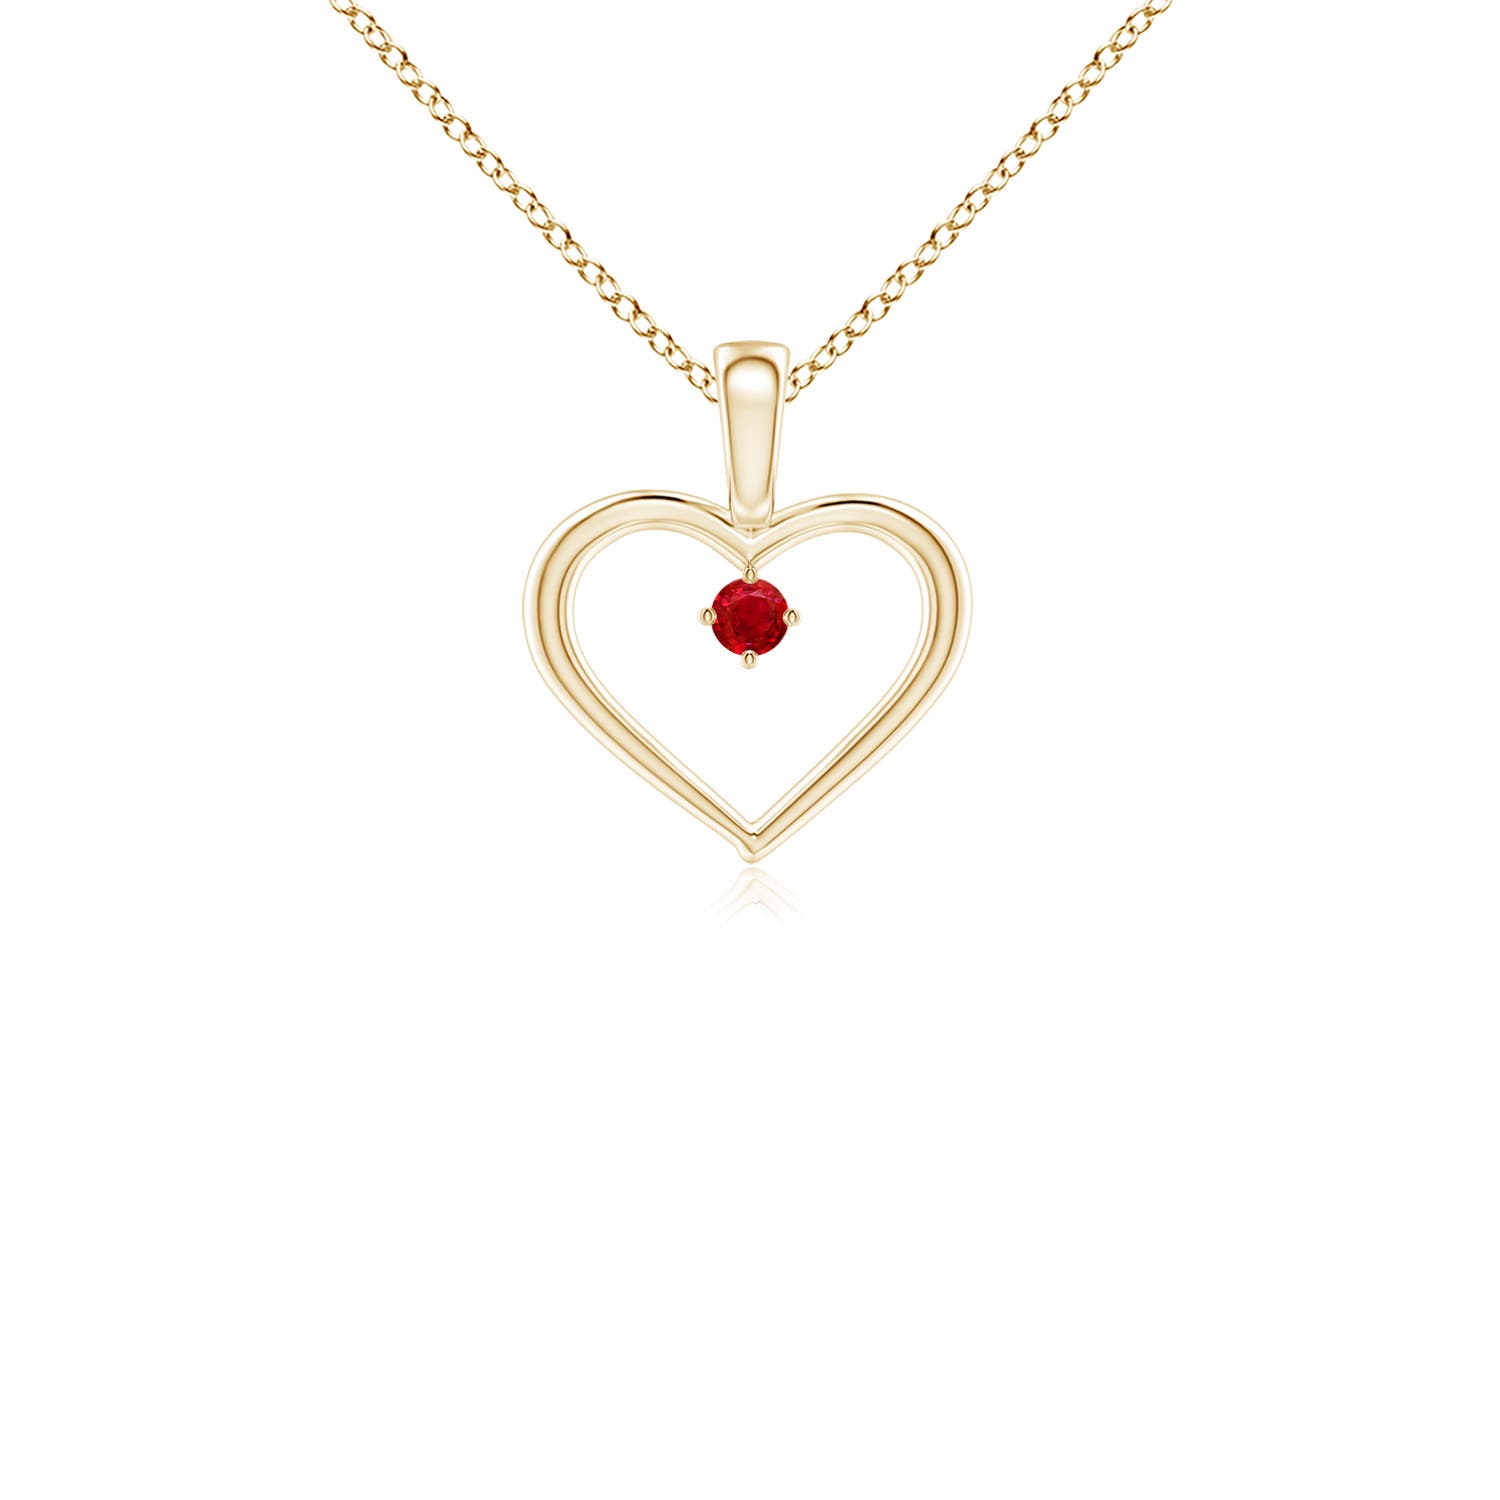 AAA - Ruby / 0.09 CT / 14 KT Yellow Gold